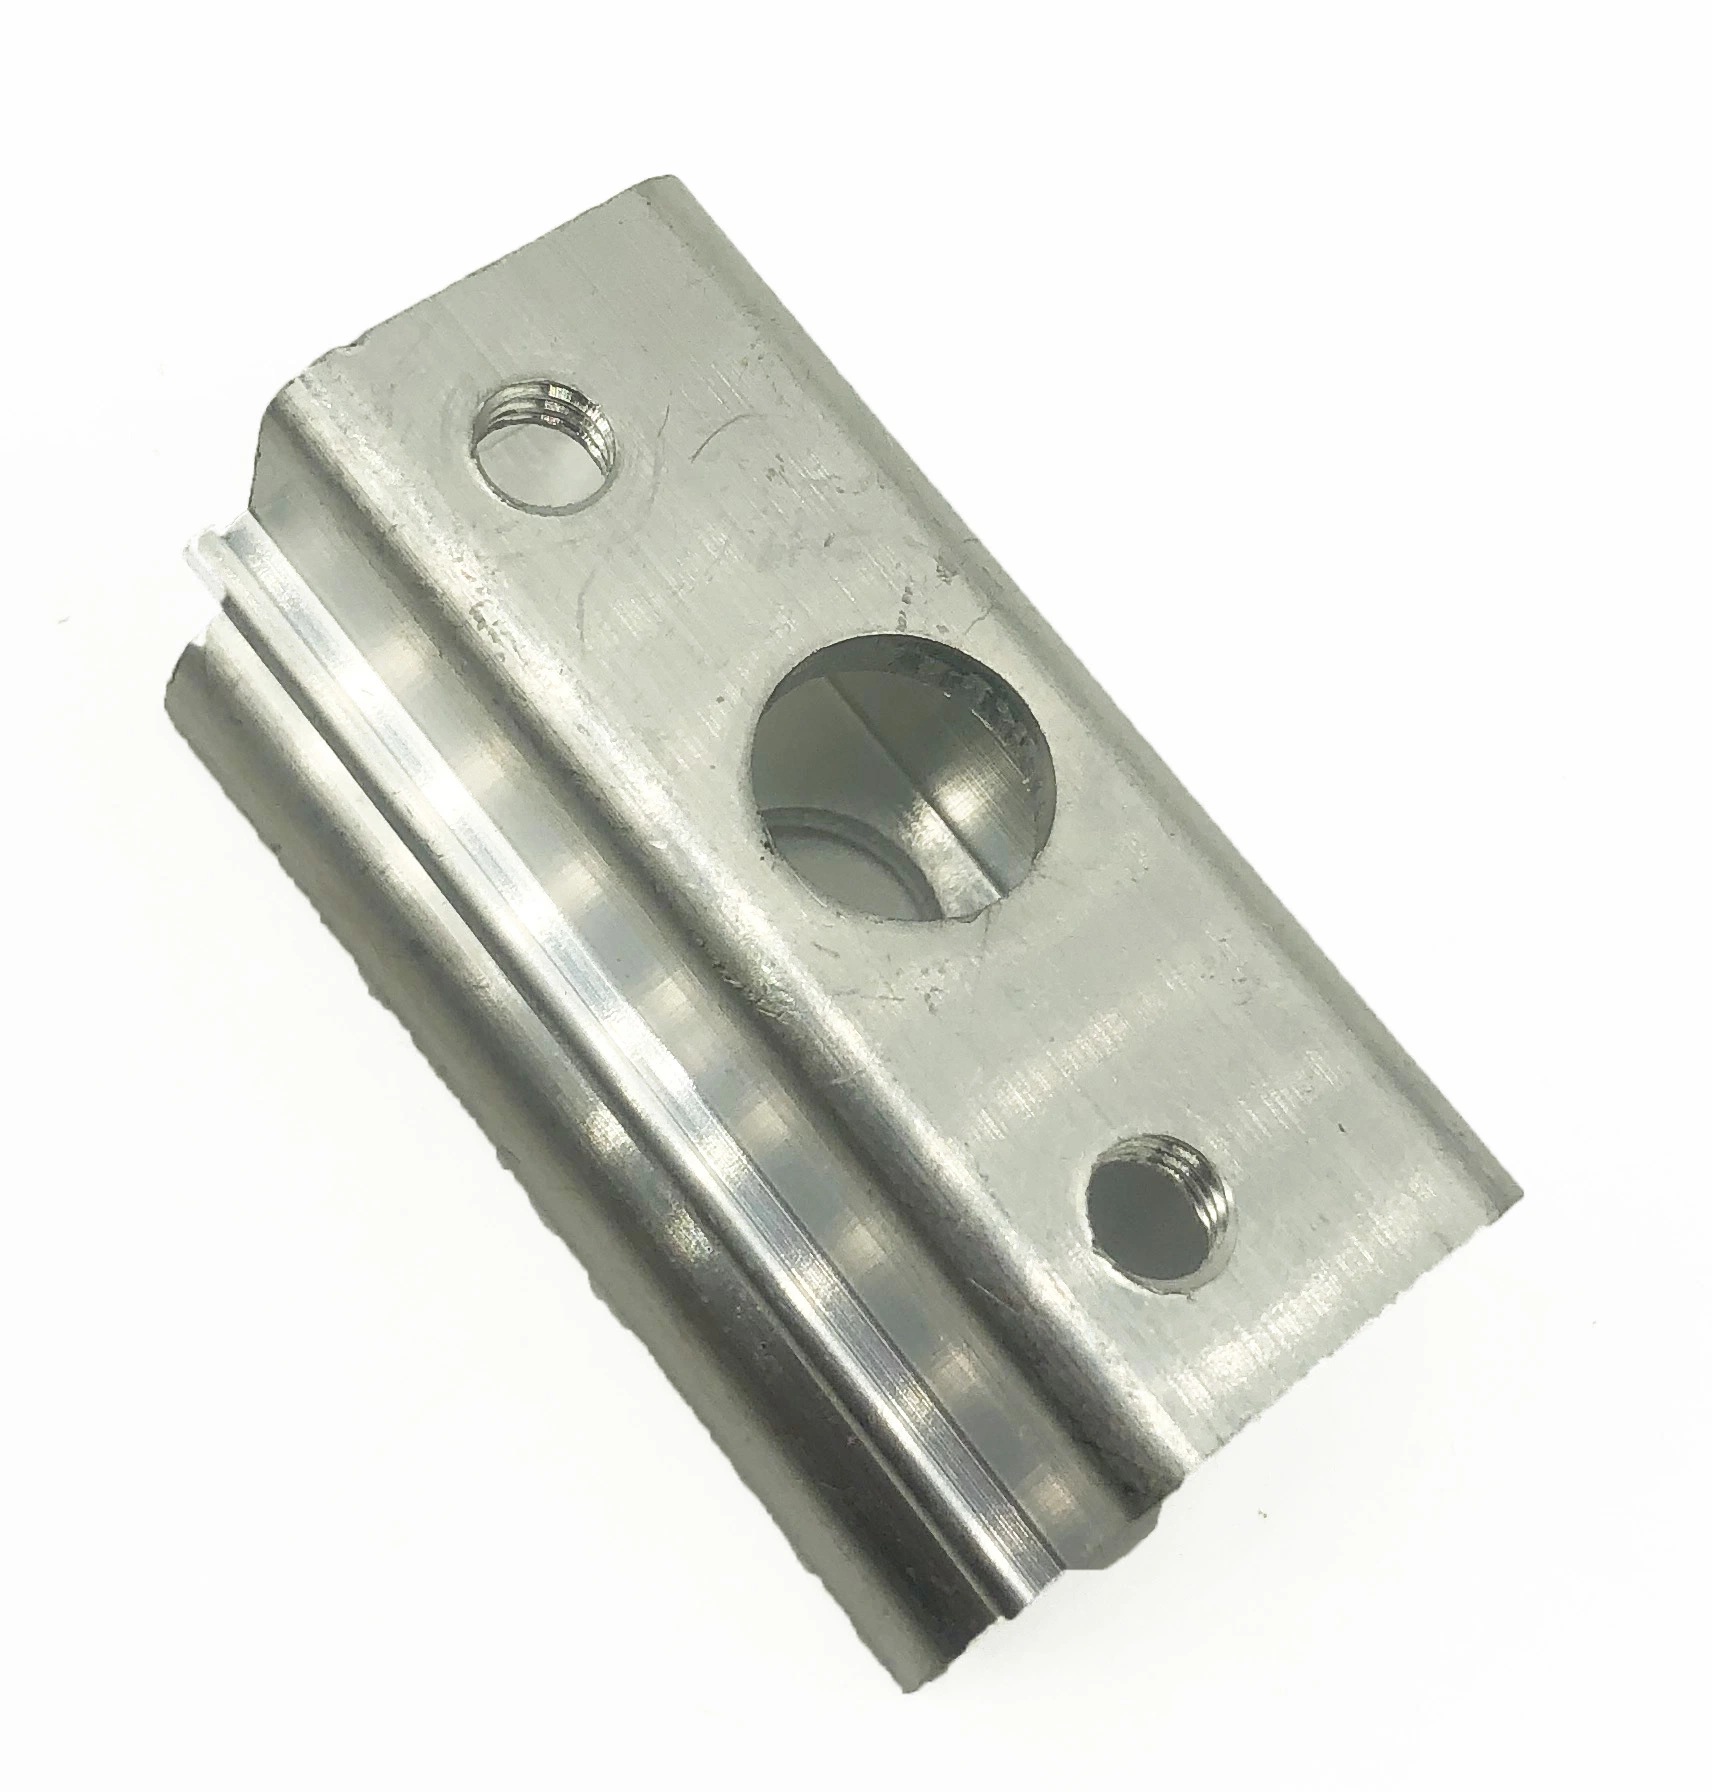 Metal Parts, Hardware Components for Building, Metal Machinery Parts